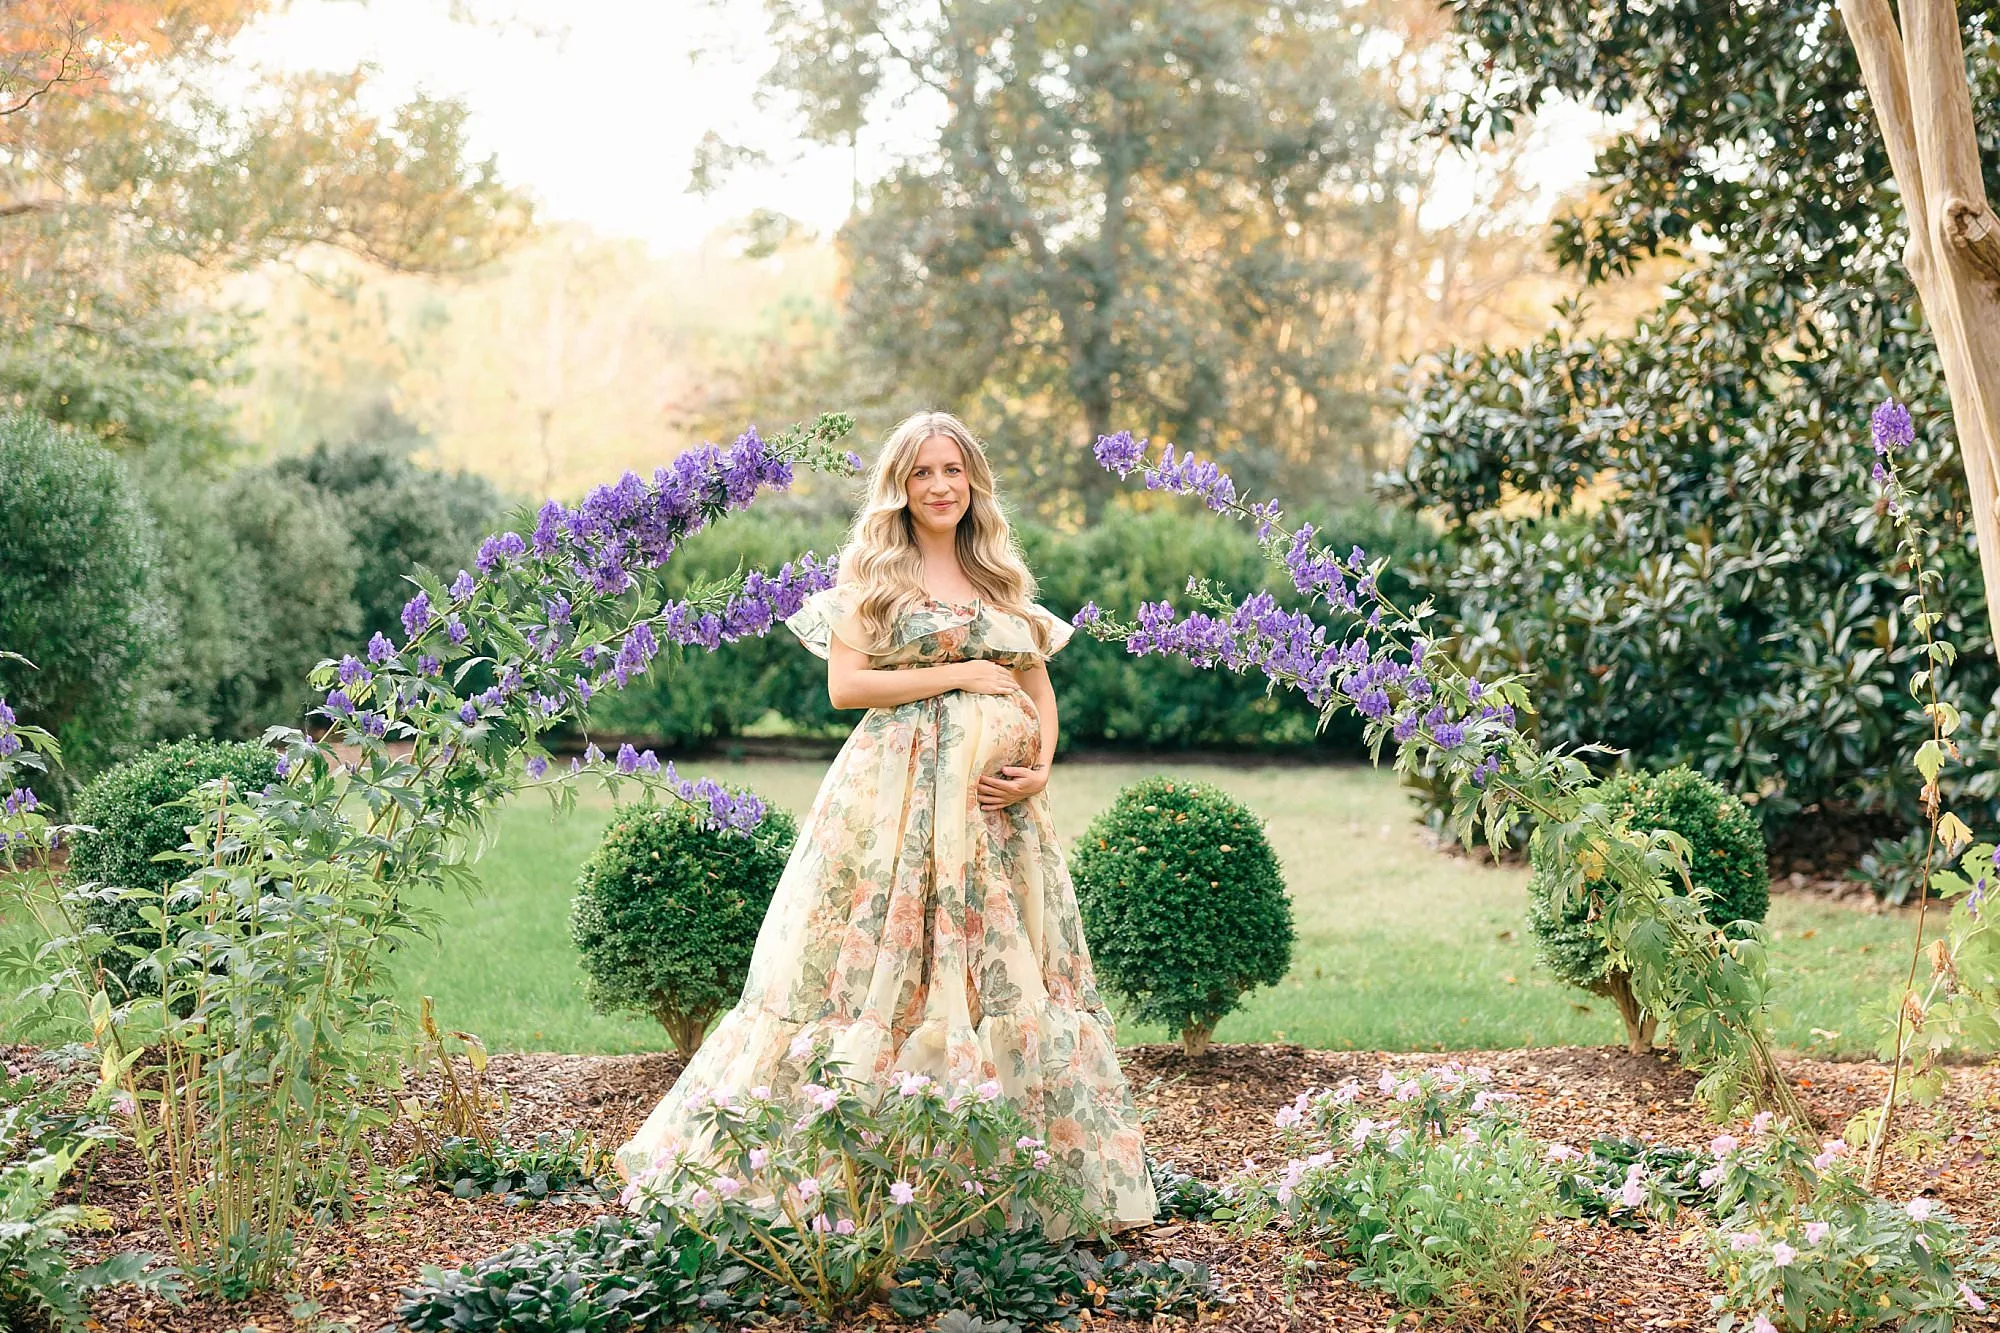 pregnant woman in floral dress in a garden